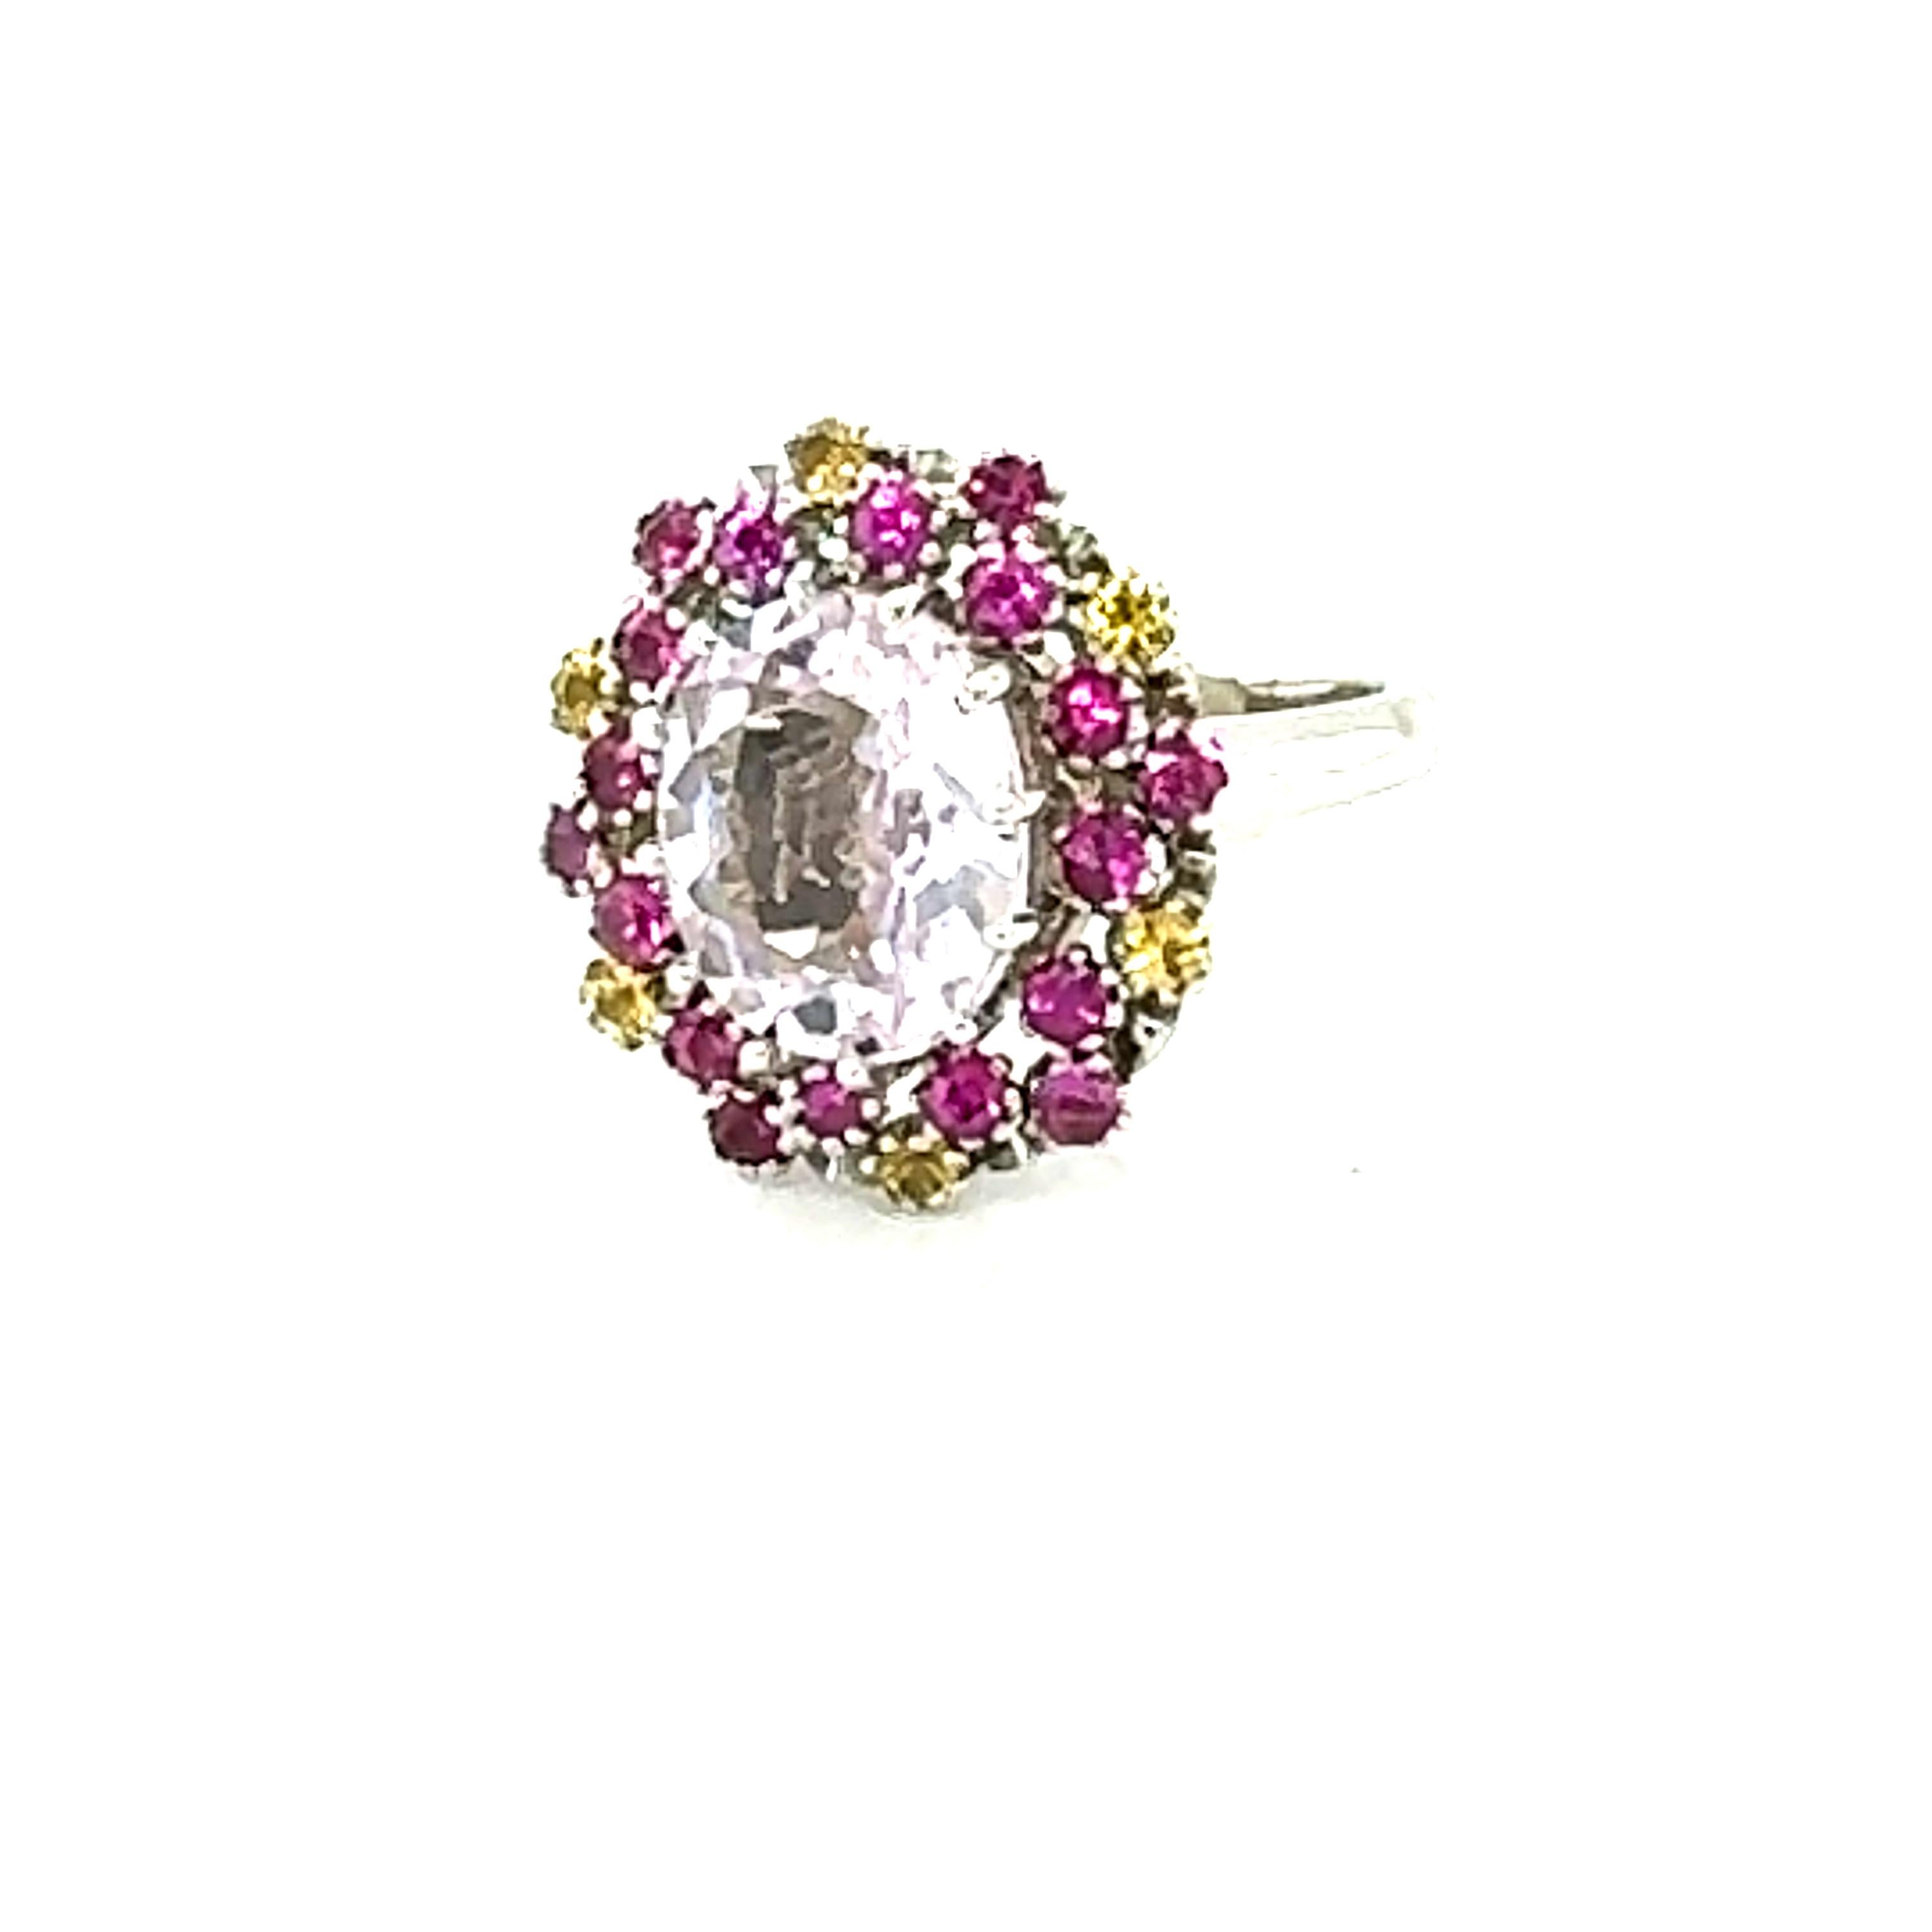 4.94 Carat Kunzite Pink Yellow Sapphire White Gold Cocktail Ring

This beautiful ring has an Oval Cut 3.81 carat Kunzite that is set in the center of the ring and is surrounded by 24 Round Cut Pink and Yellow Sapphires that weigh 1.13 carats. The